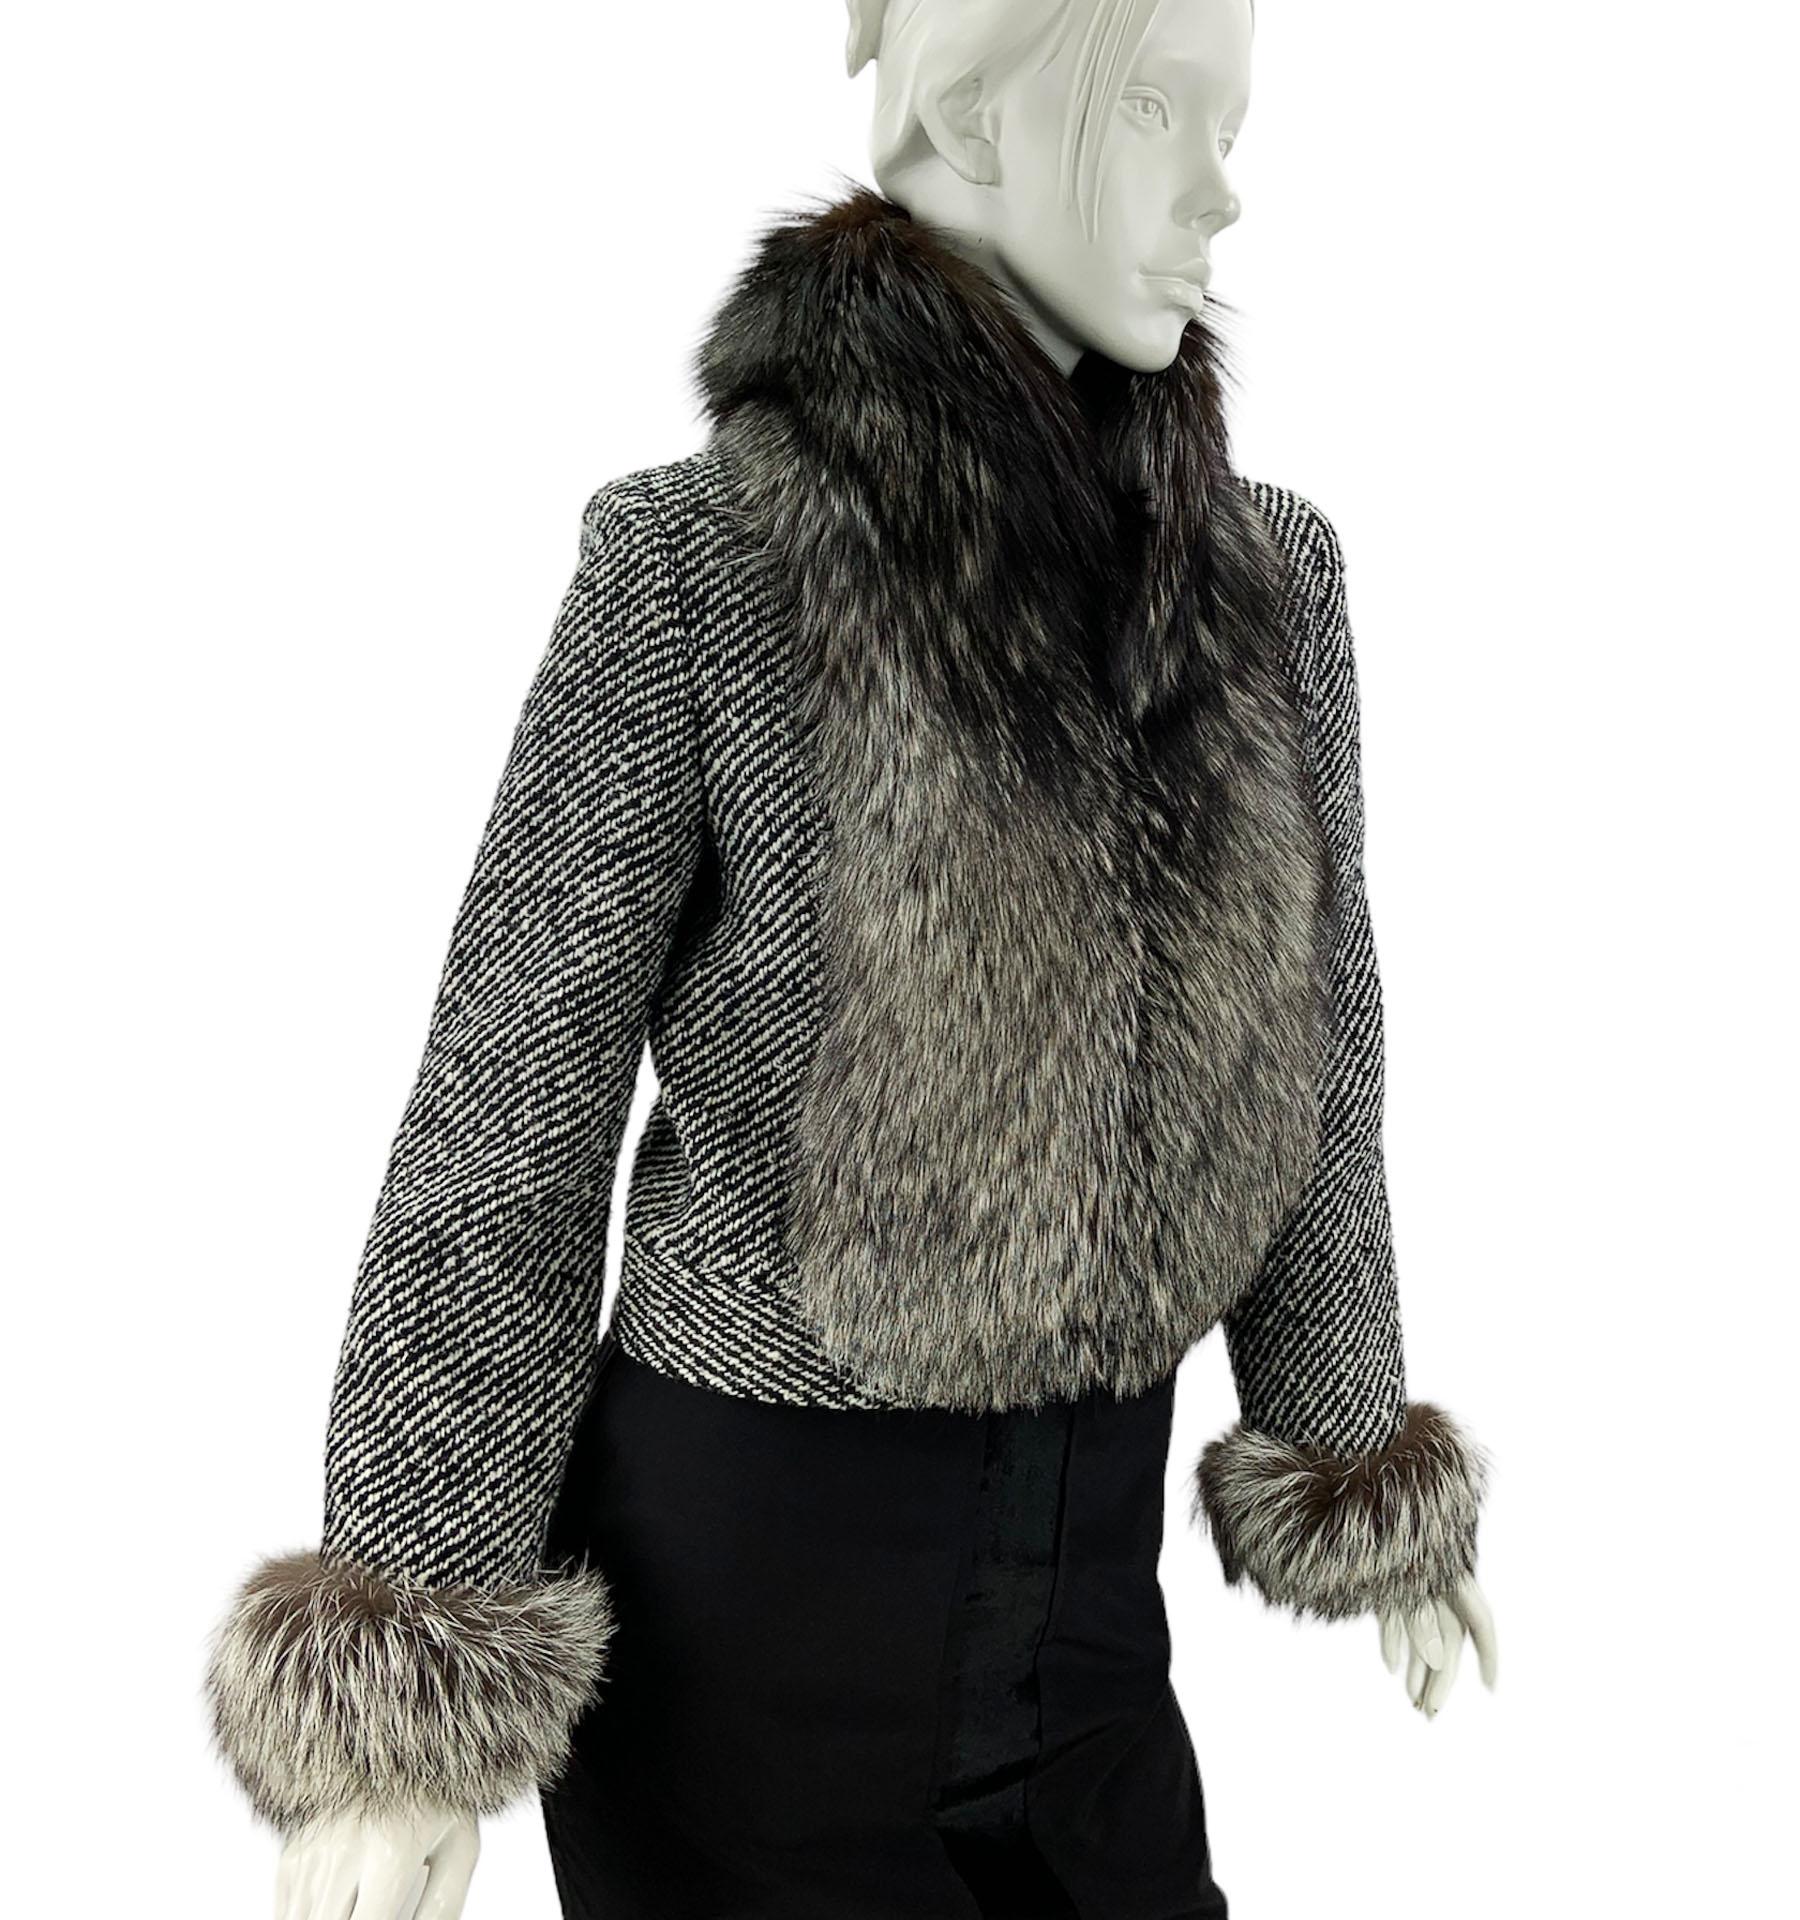 Vintage Valentino Tweed Wool Fur Trim Fitted Jacket
US size - 6
Black and White Colors, Fox Fur Collar and Sleeves Trim, Fully Lined, Hook and Eye Closure.
Measurements: Length - 19 inches, Bust - 36